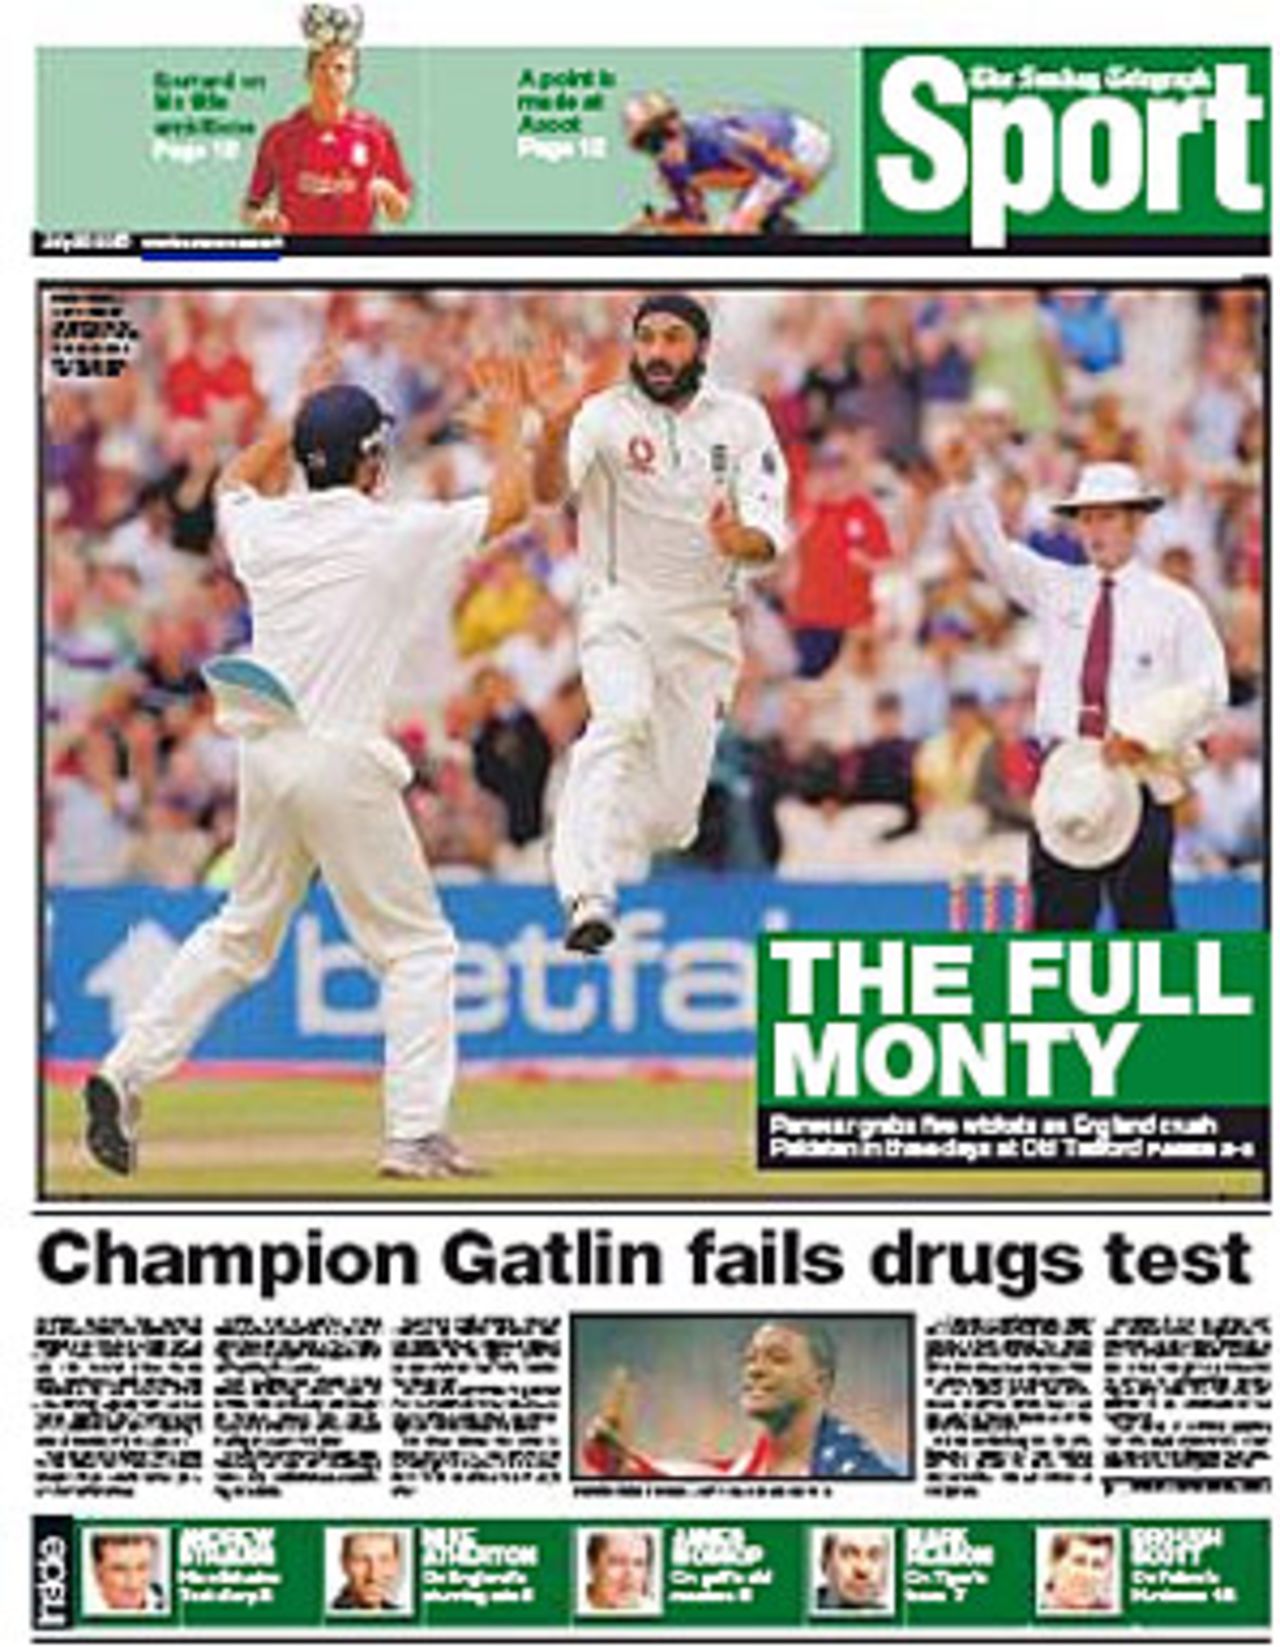 The front page of <I>The Sunday Telegraph</I> following England's win over Pakistan at Old Trafford, July 30, 2006